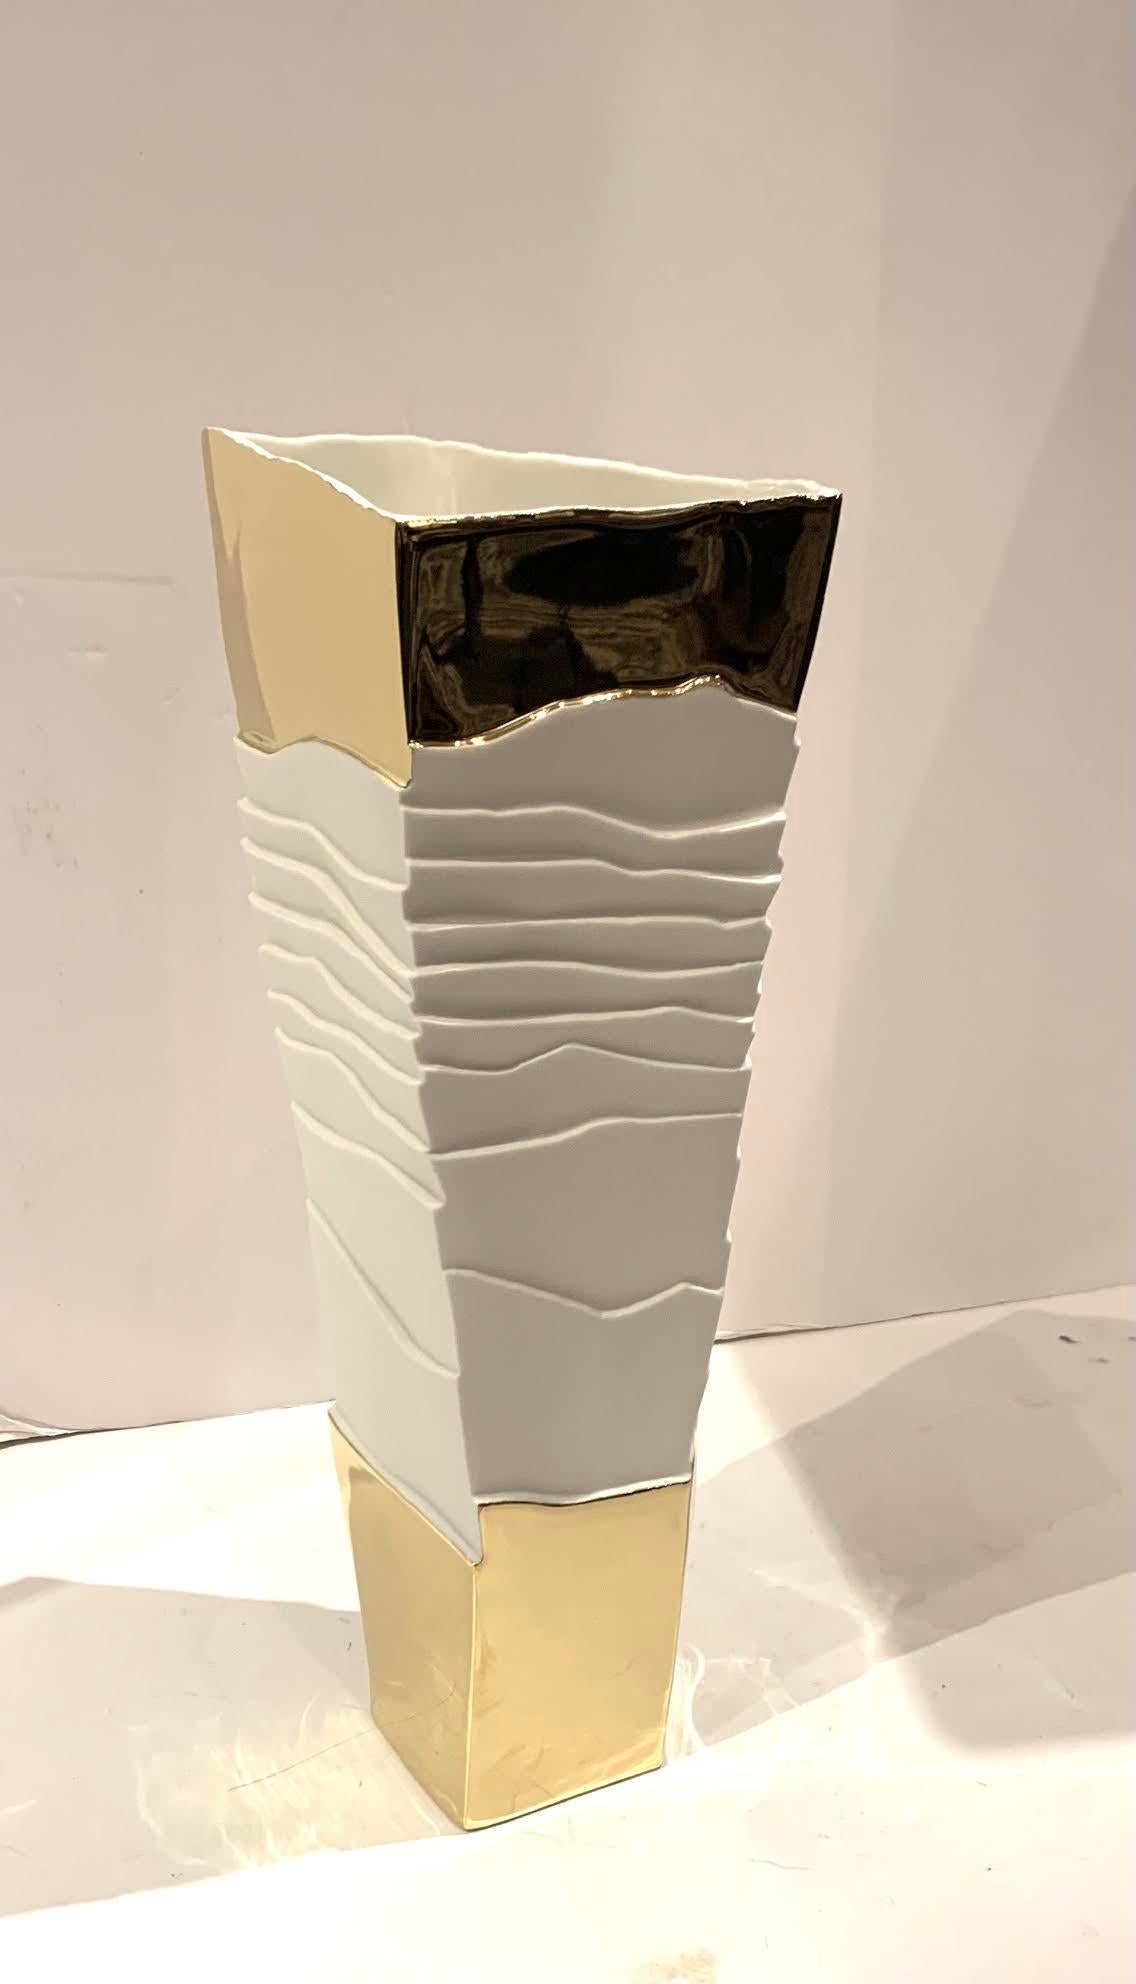 Contemporary Italian handmade white porcelain vase with cubist design.
White wavy rib design and smooth 22K gold top and bottom.